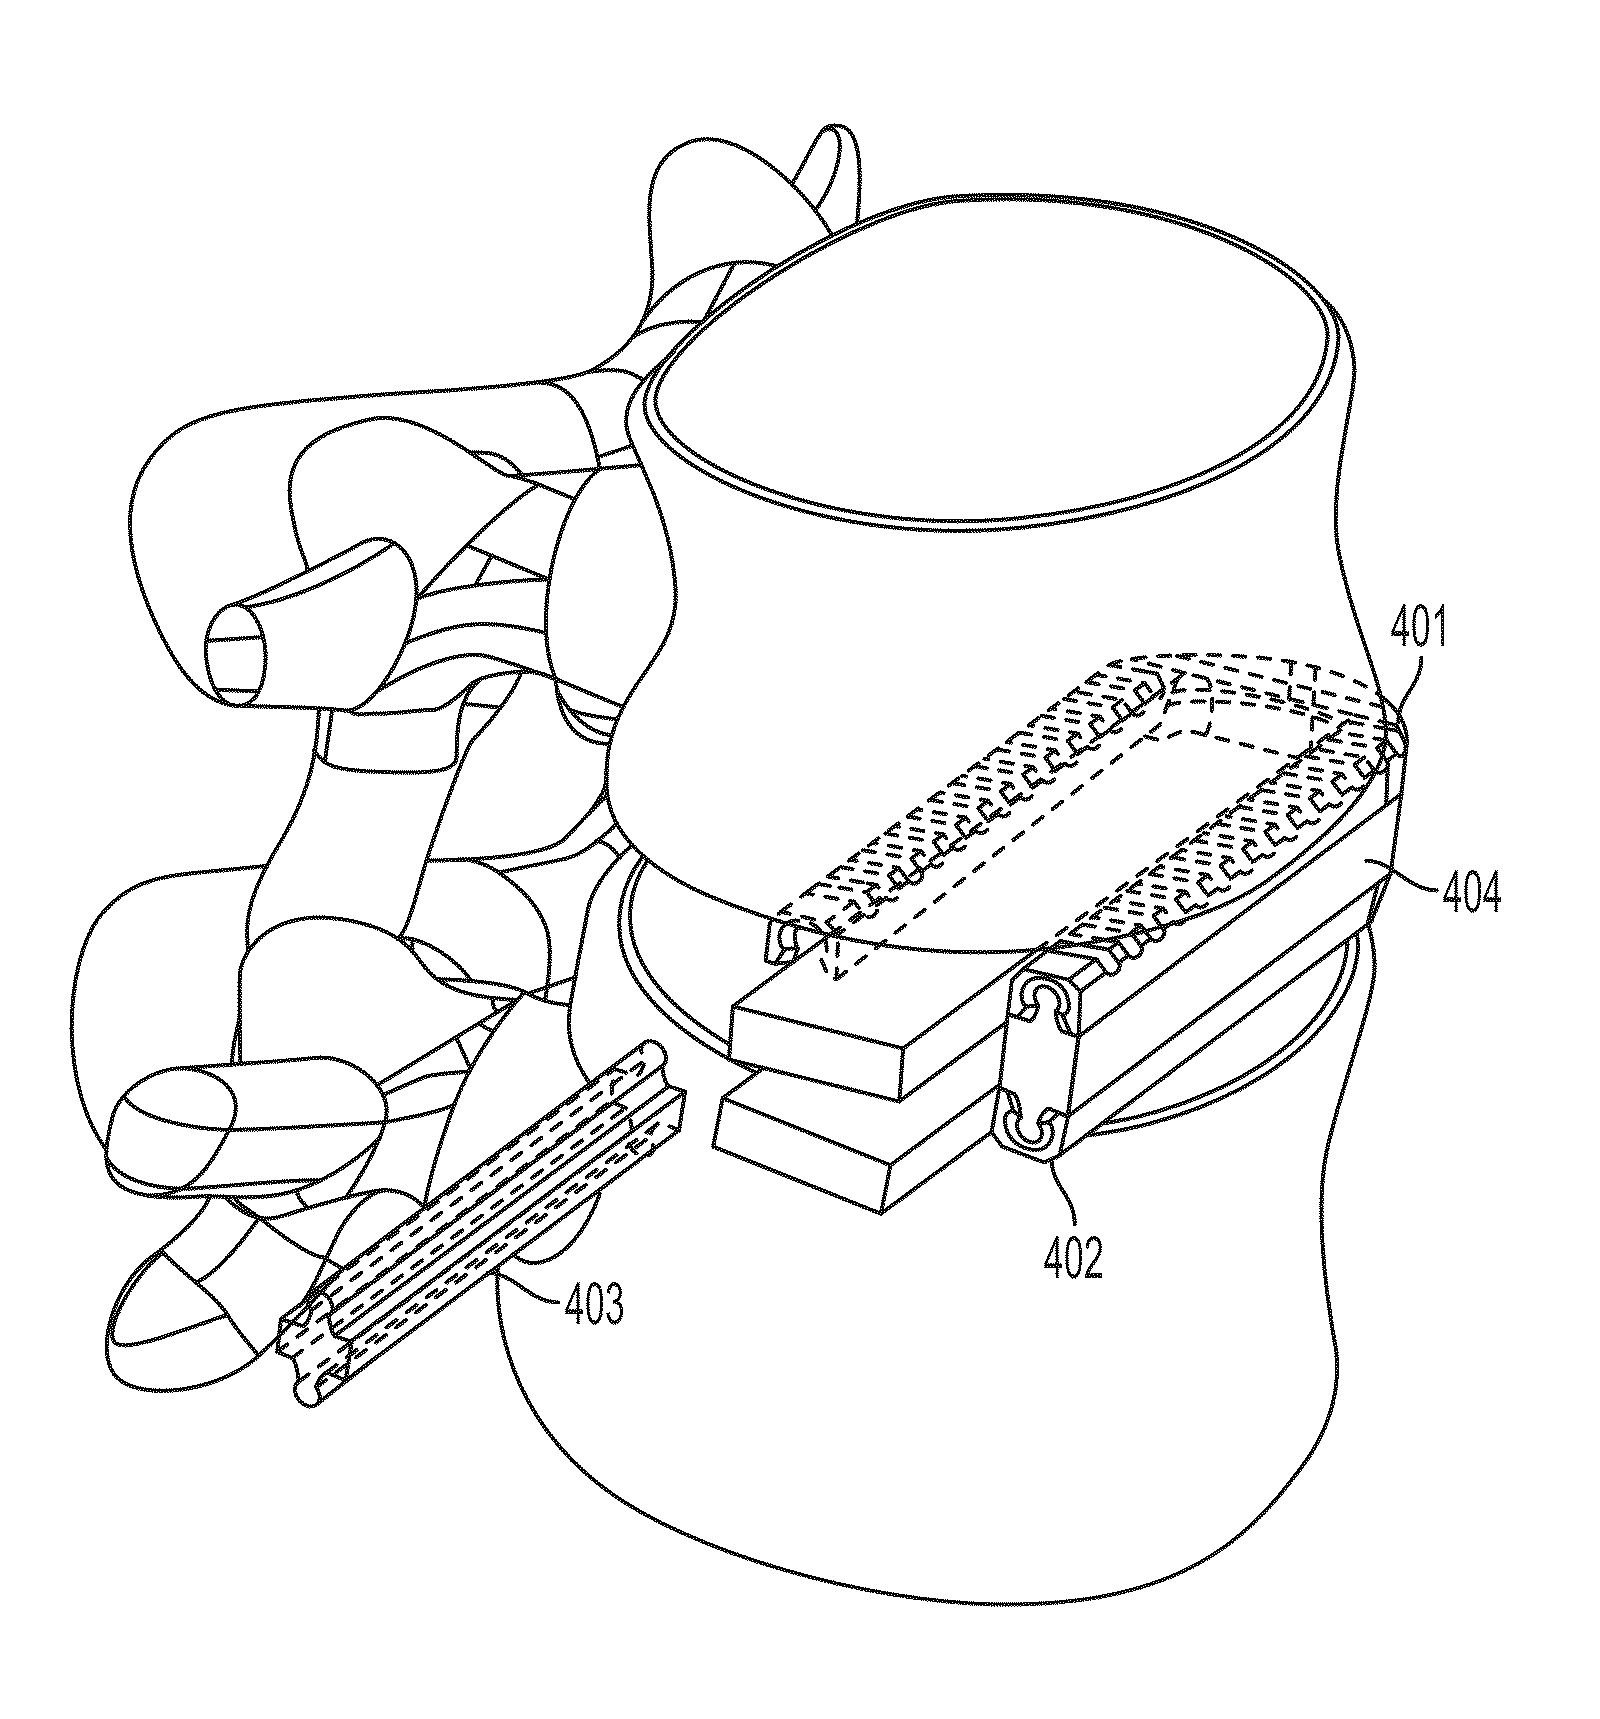 Interbody fusion device with separable retention component for lateral approach and associated methods